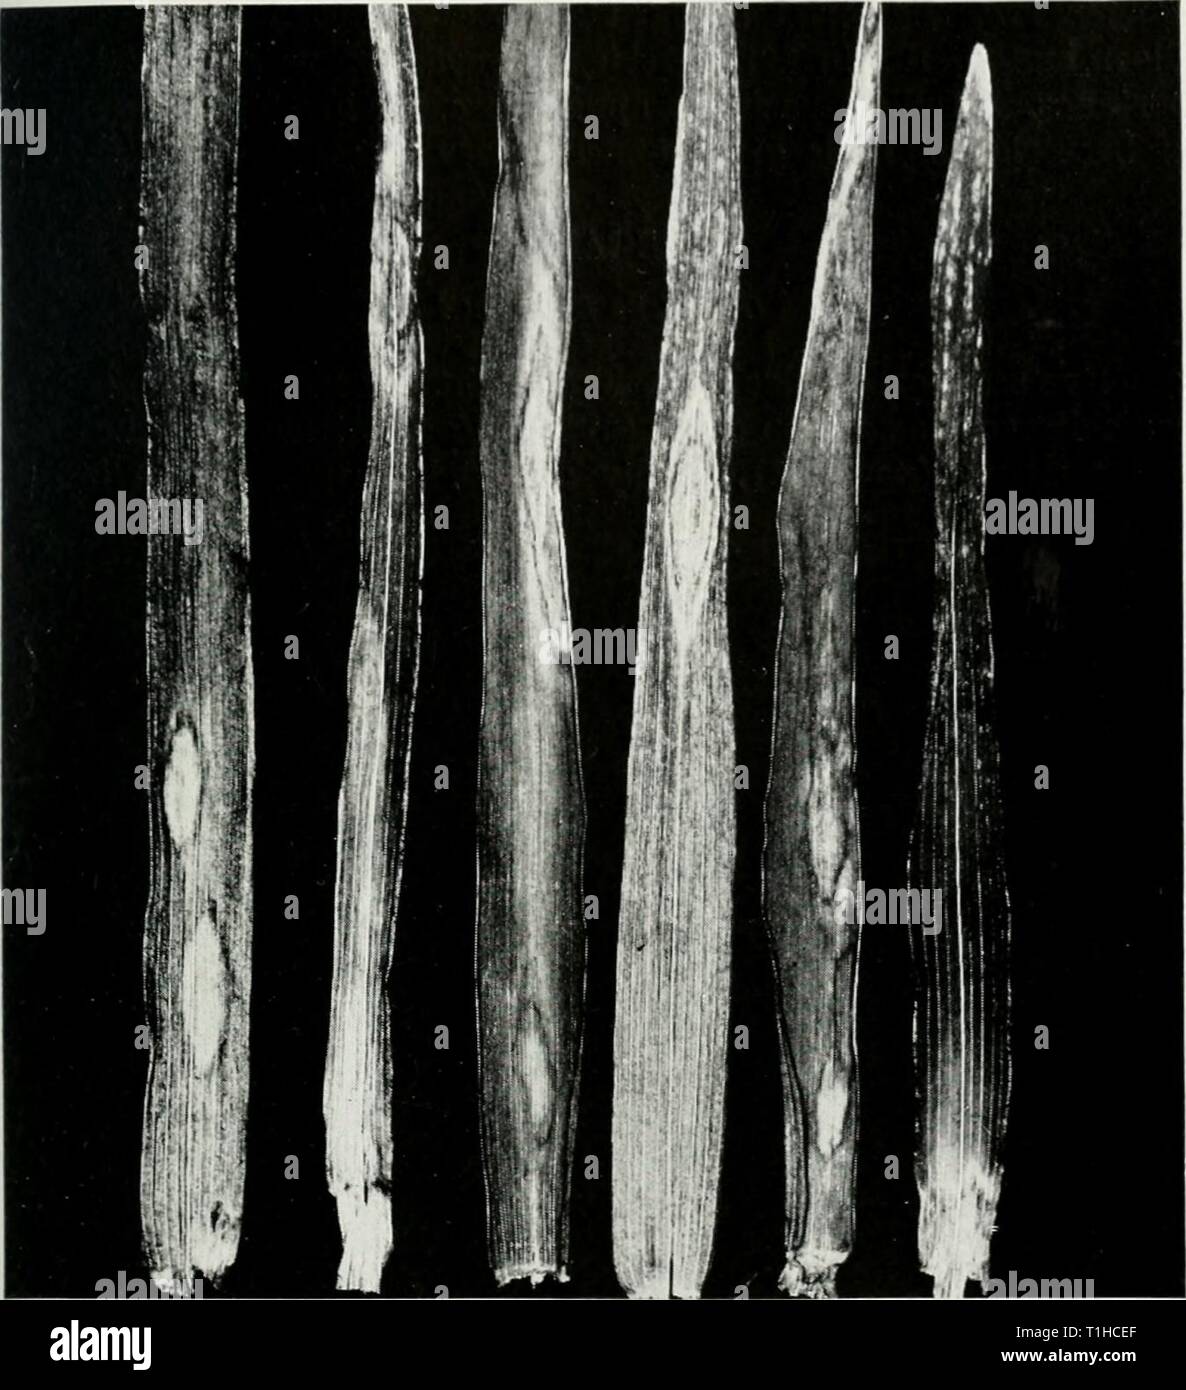 Diseases of small grain crops Diseases of small grain crops in Illinois  diseasesofsmallg35boew Year: 1939  BOEWE: DISEASES OF SMALL GRAIN CROPS 101    Fig. 39.—The scald disease of rye. Infection of leaves by a parasitic fungus results in the appearance of oval, bleached spots, which greatly reduce the food-making capacity of affected leaves. for other diseases ought to aid in controlling it, if it should become a serious factor in rye production. BACTERIAL BLIGHT Bacterium translucens secalis Although the bacterial blight of rye is the same disease as the bacterial blight of barley, only a s Stock Photo